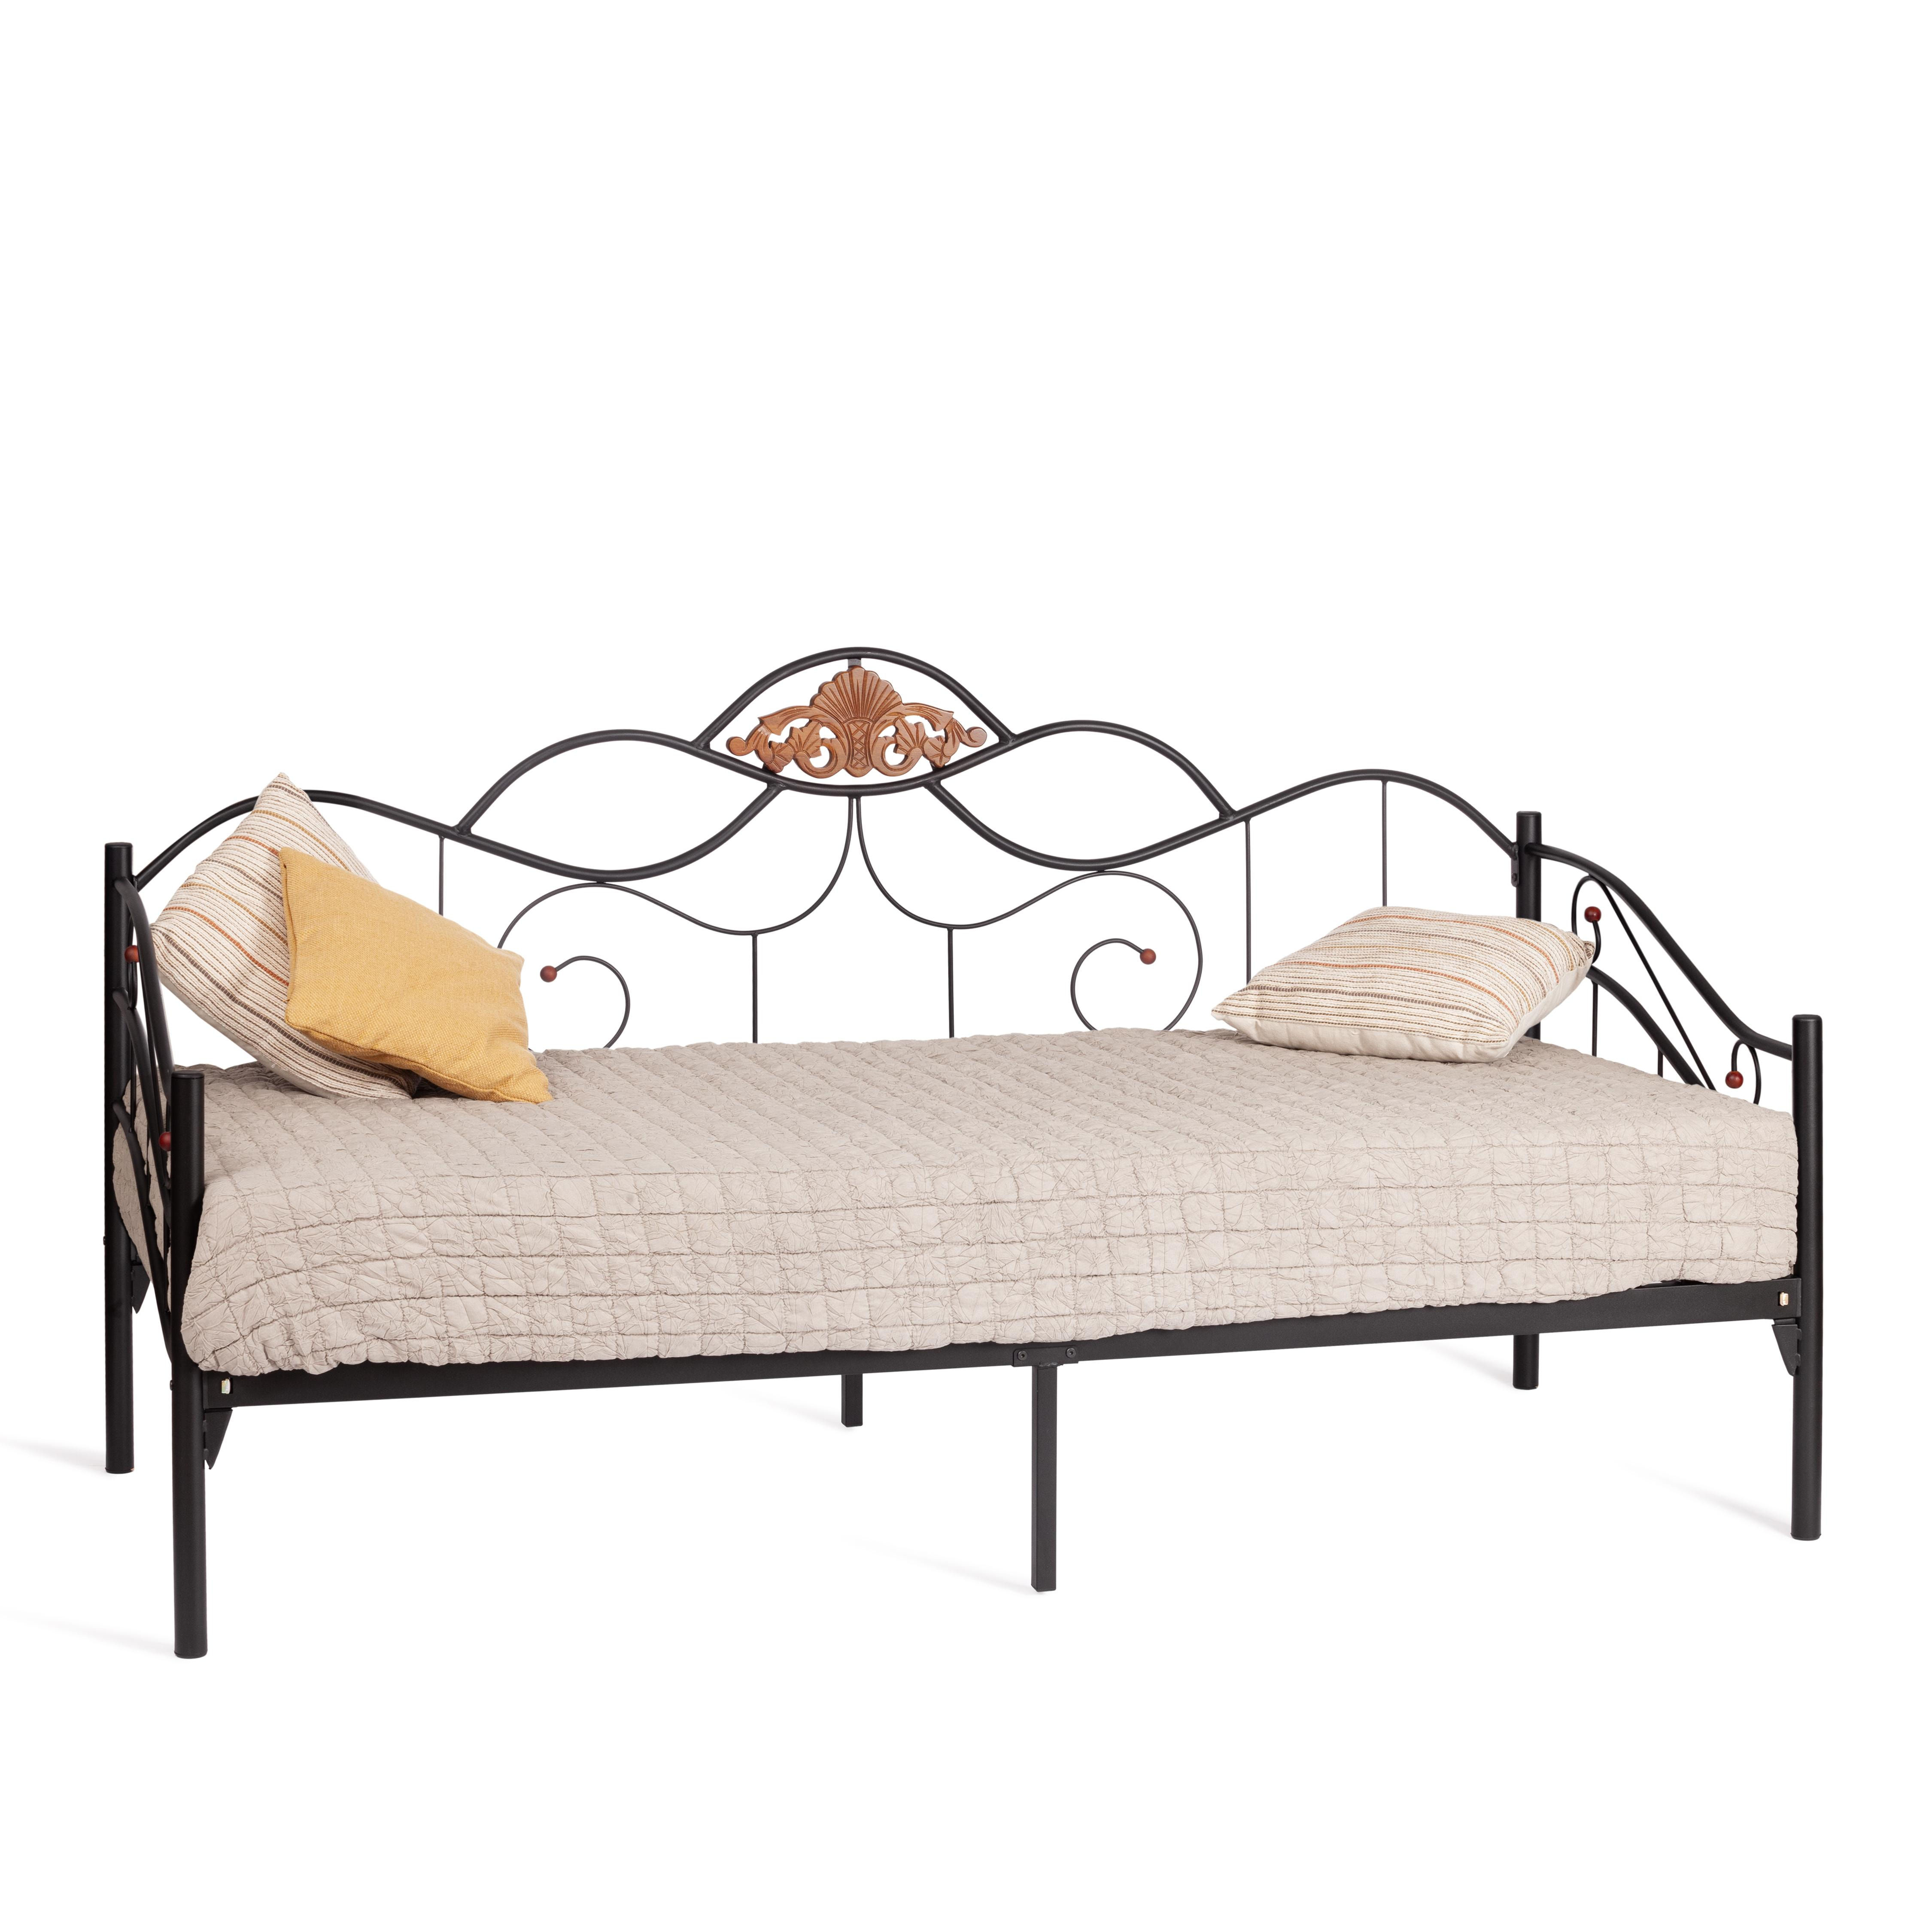 TetChair  TetChair Federica AT-881 Day bed  , 